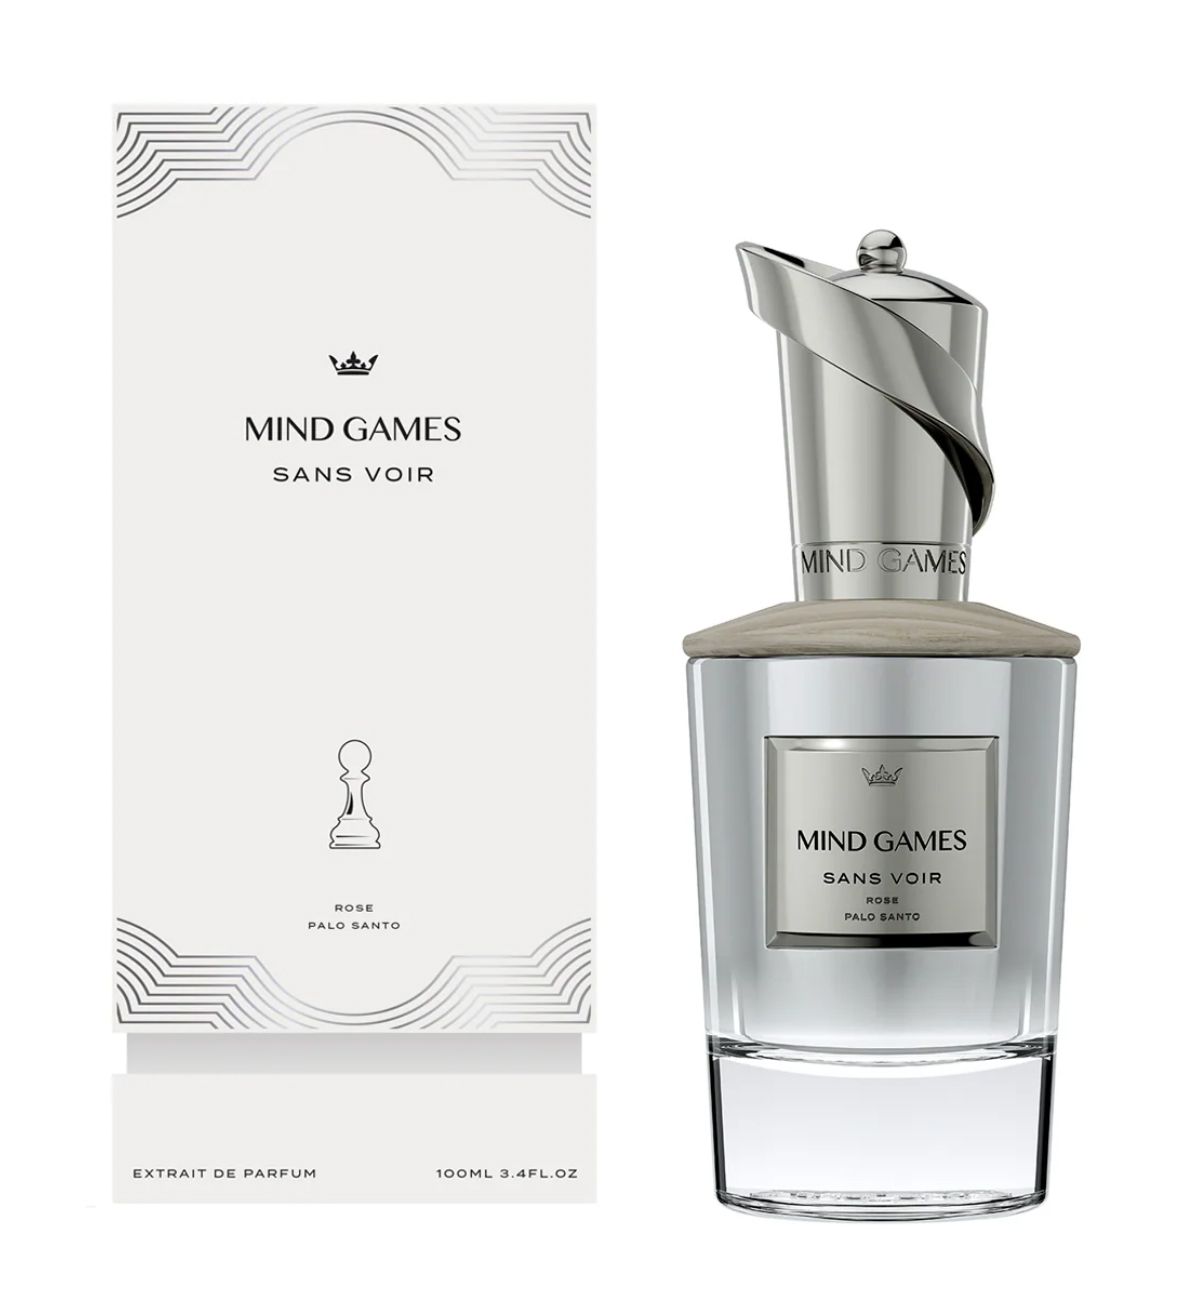 Sans Voir Mind Games perfume - a new fragrance for women and men 2023